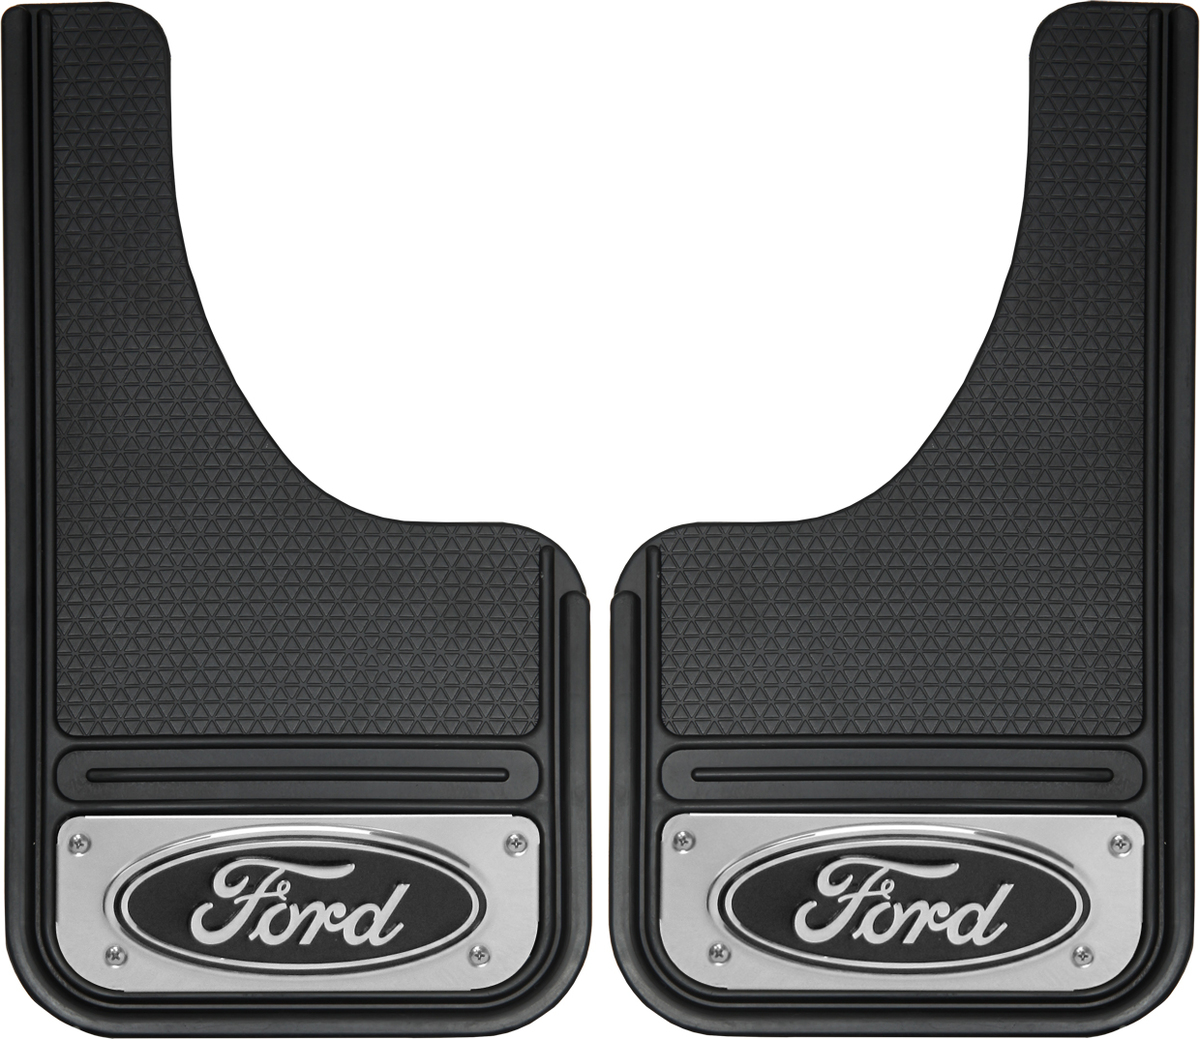 Mud flaps and ford trucks